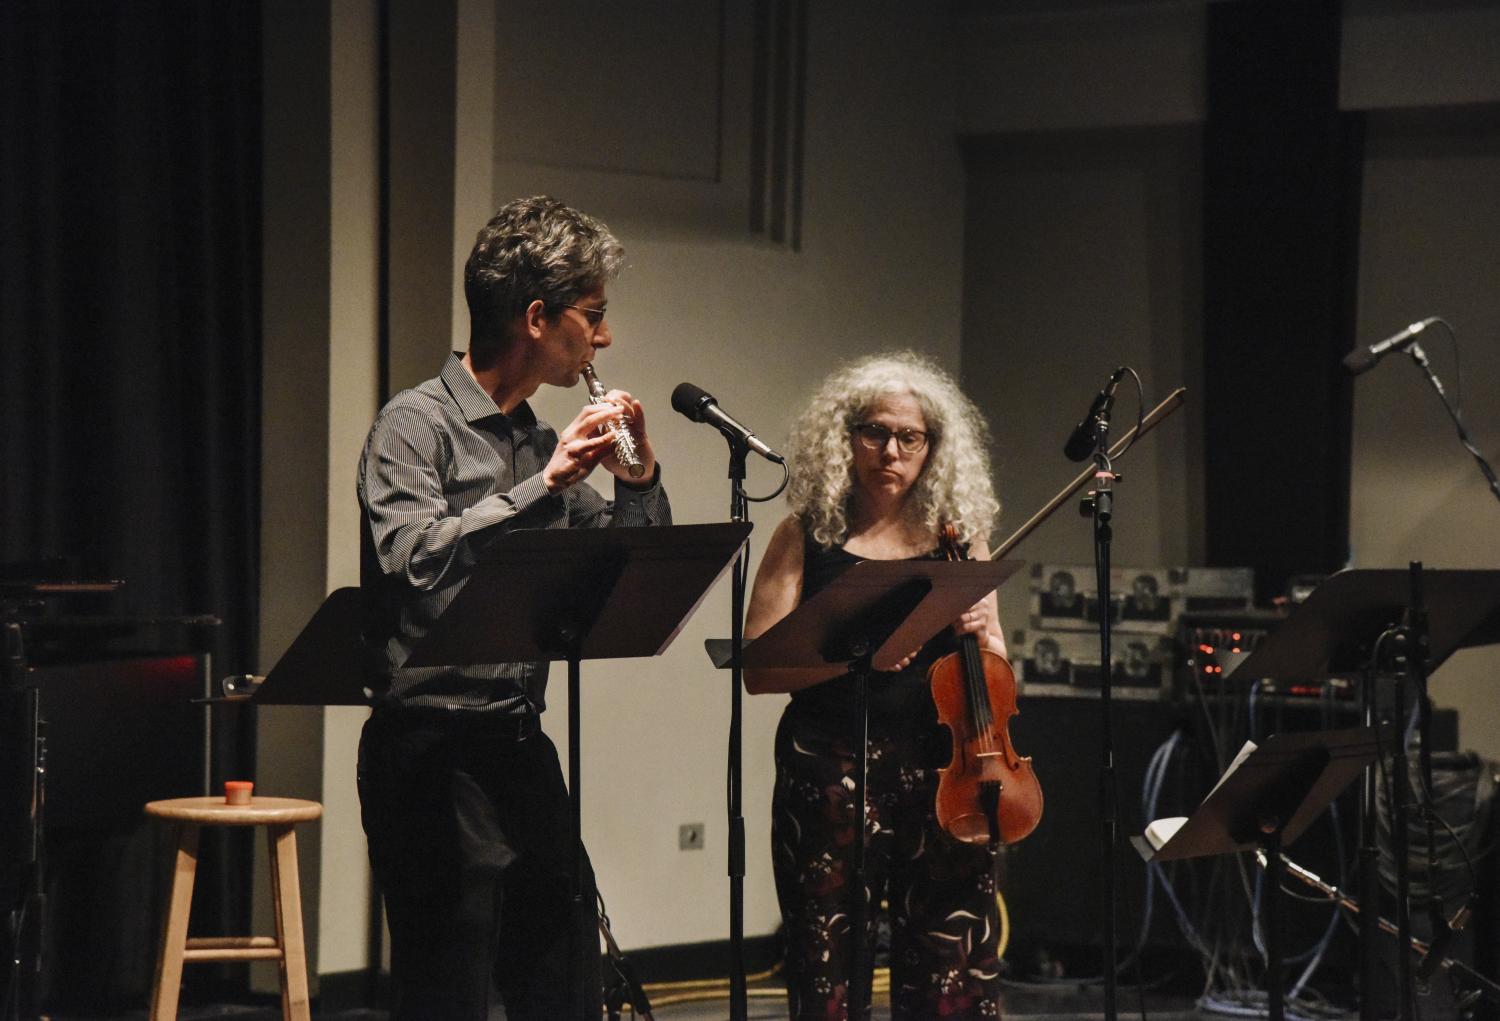 Alicia Svigals and Yonatan Malin performing on stage